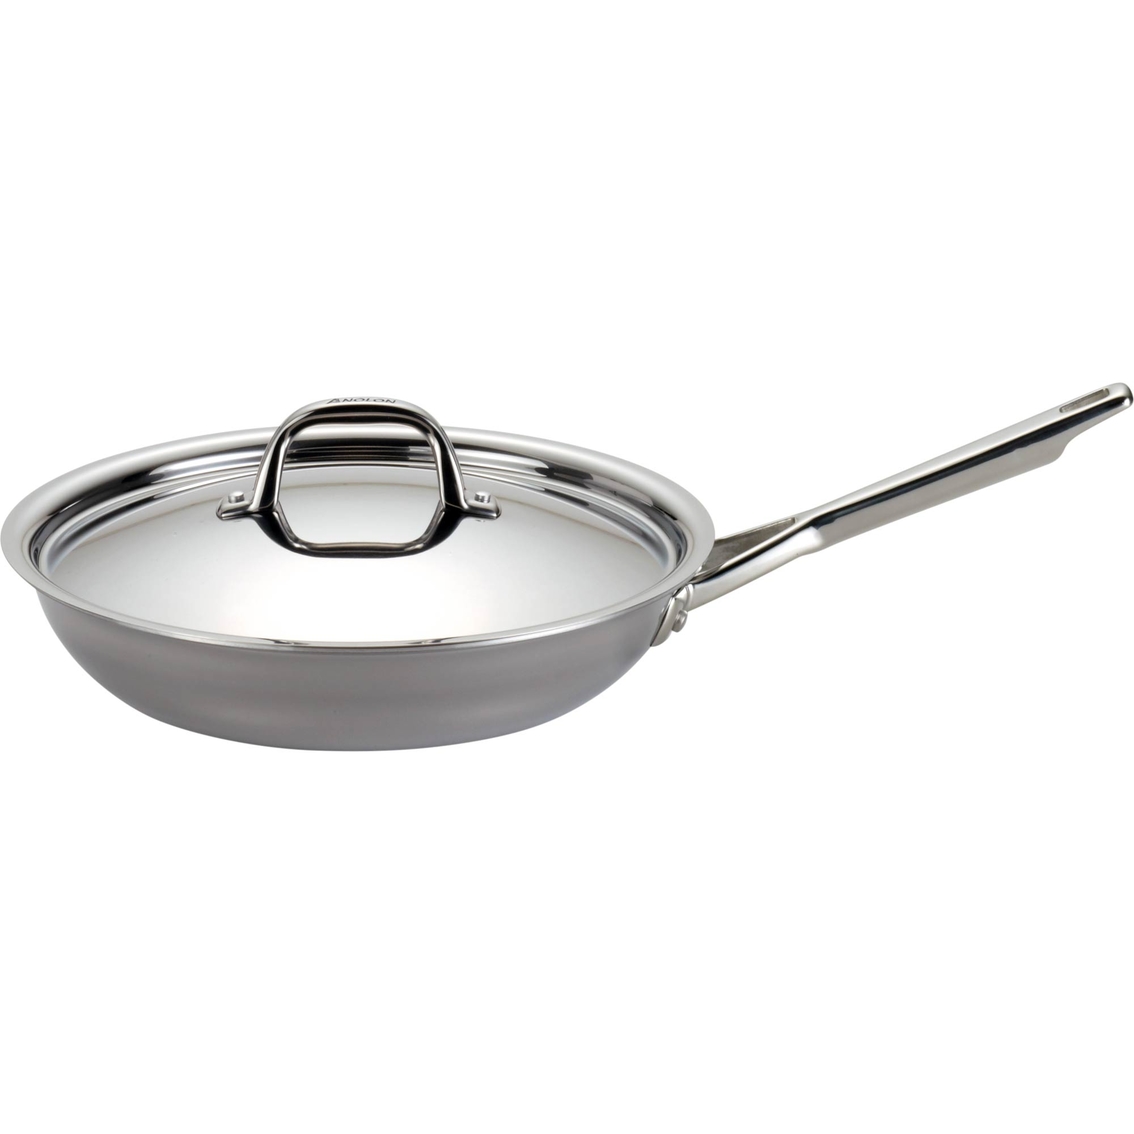 Anolon Tri Ply Clad Stainless Steel 12.75 In. Covered Skillet | Fry Anolon Tri Ply Clad Stainless Steel